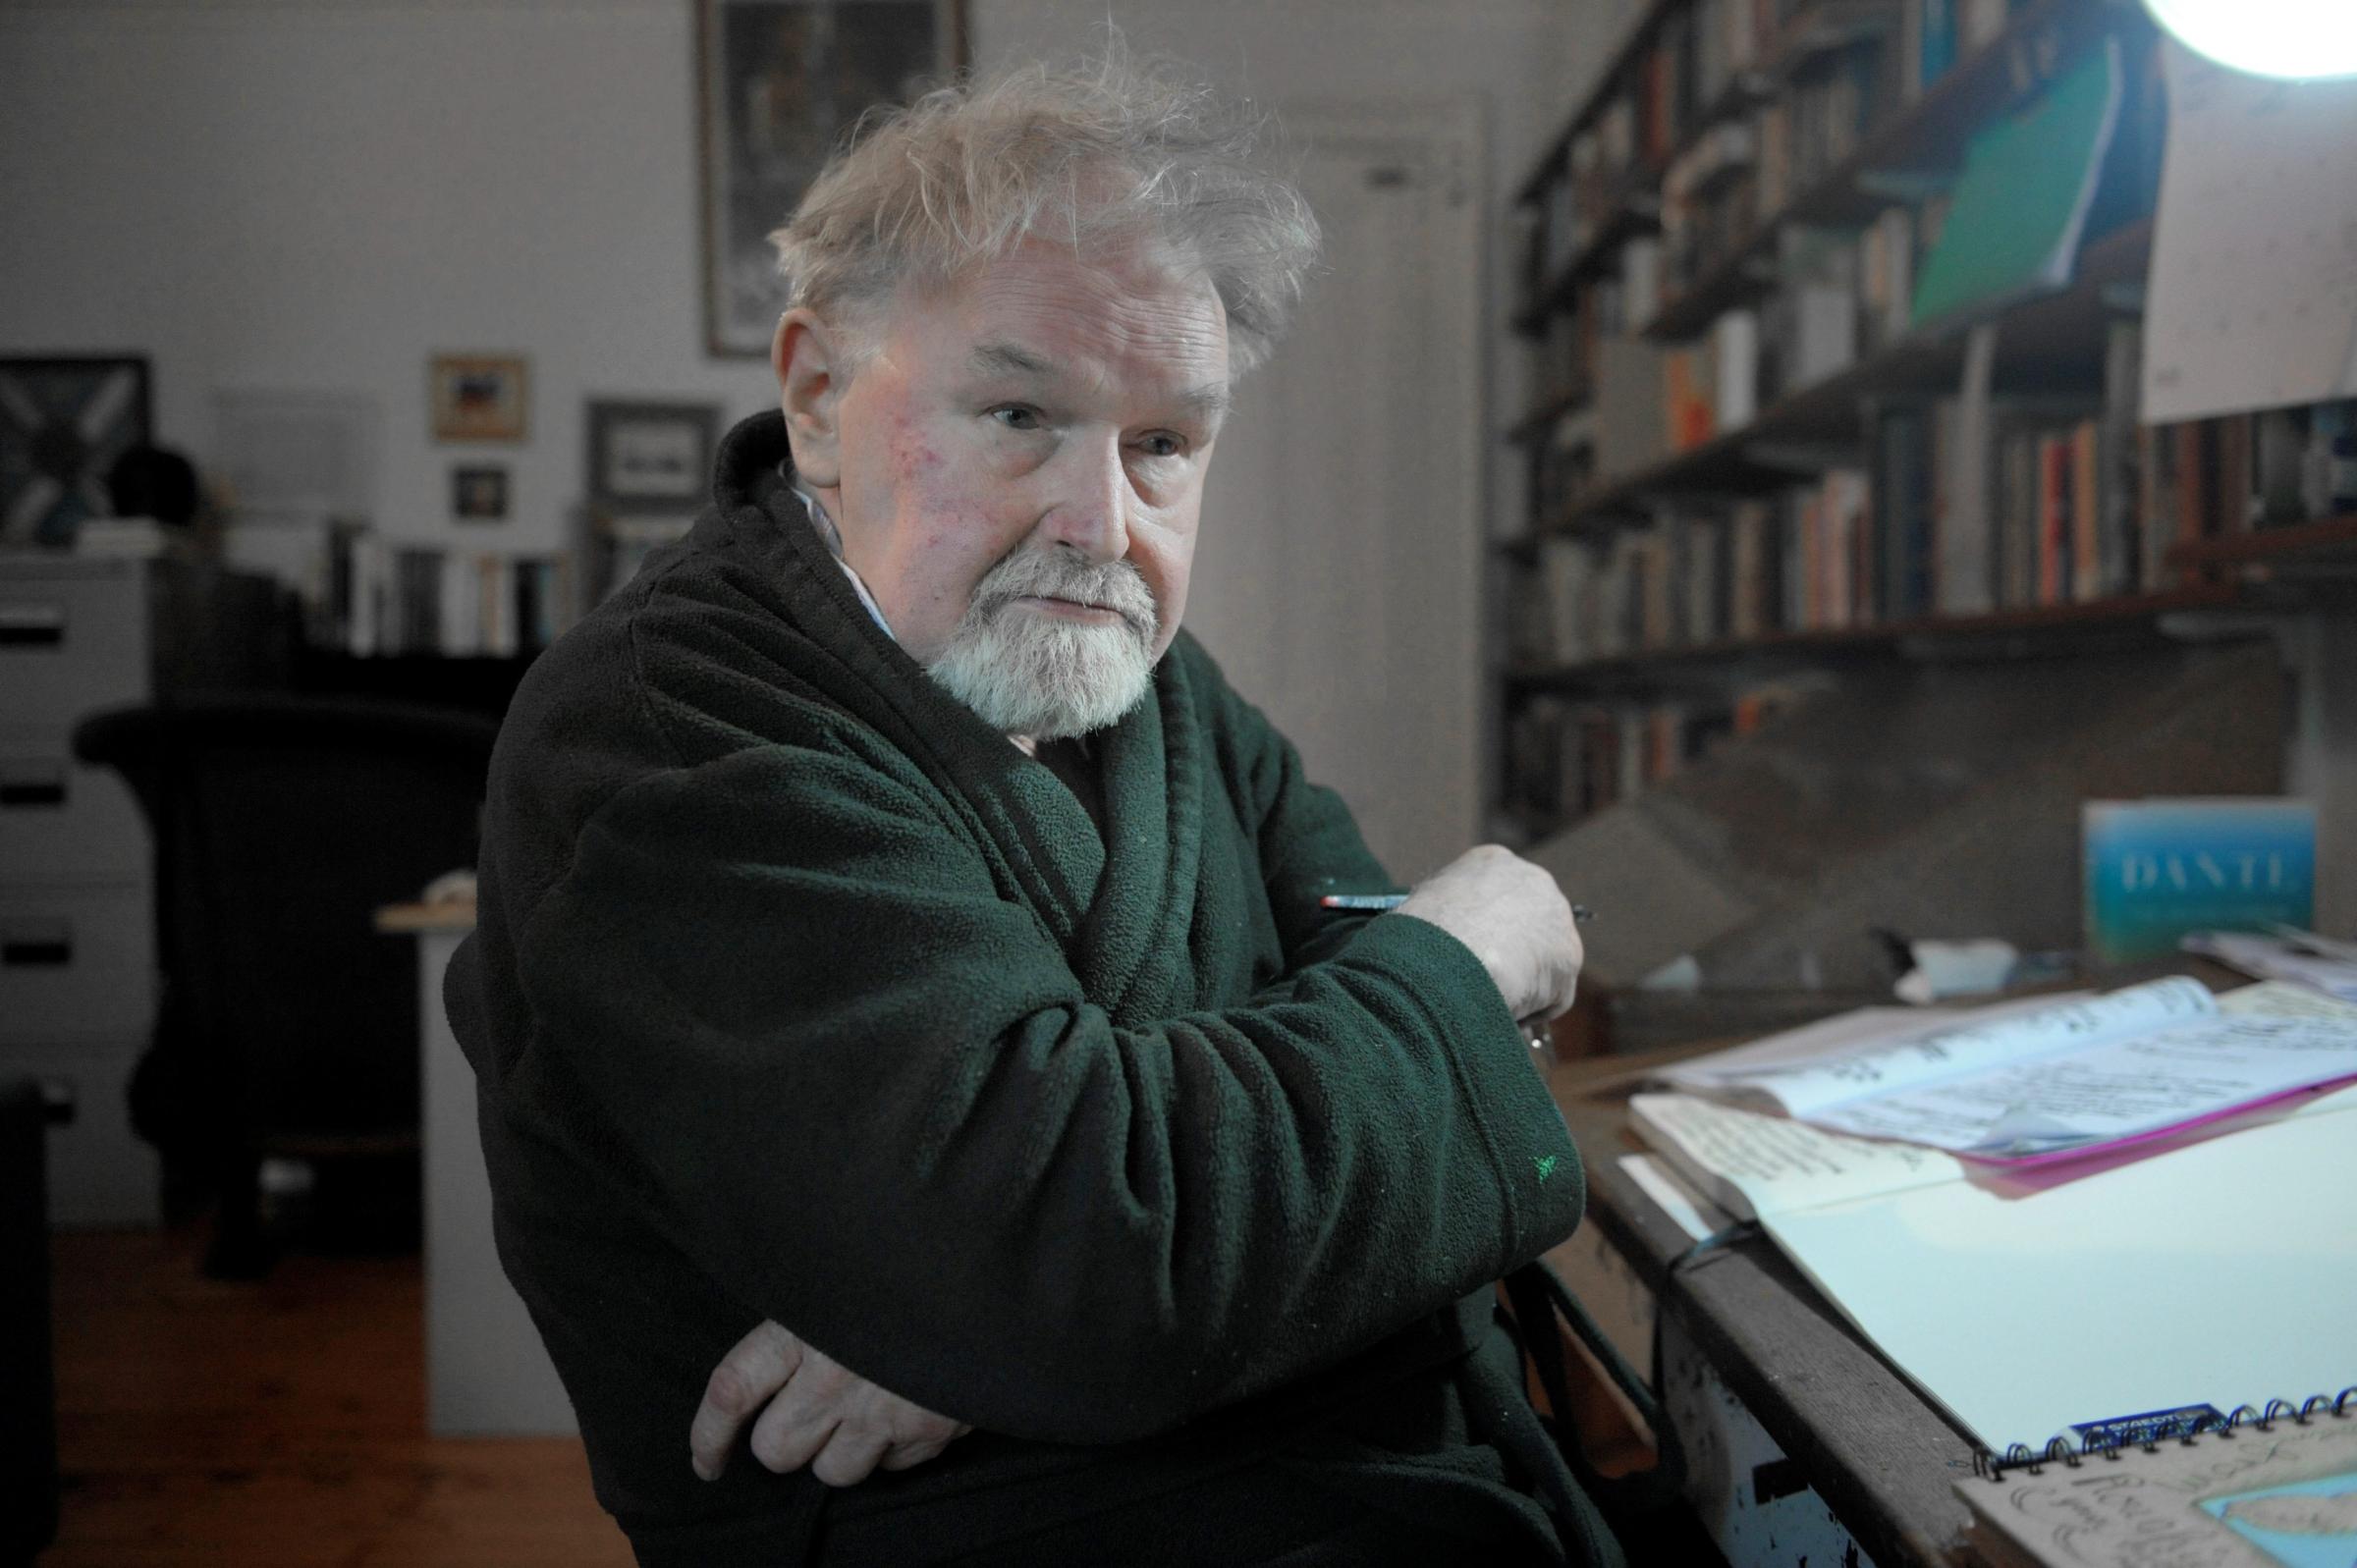 A capital idea: Alasdair Gray working on a mural to adorn the Scottish Parliament, as first London show revealed